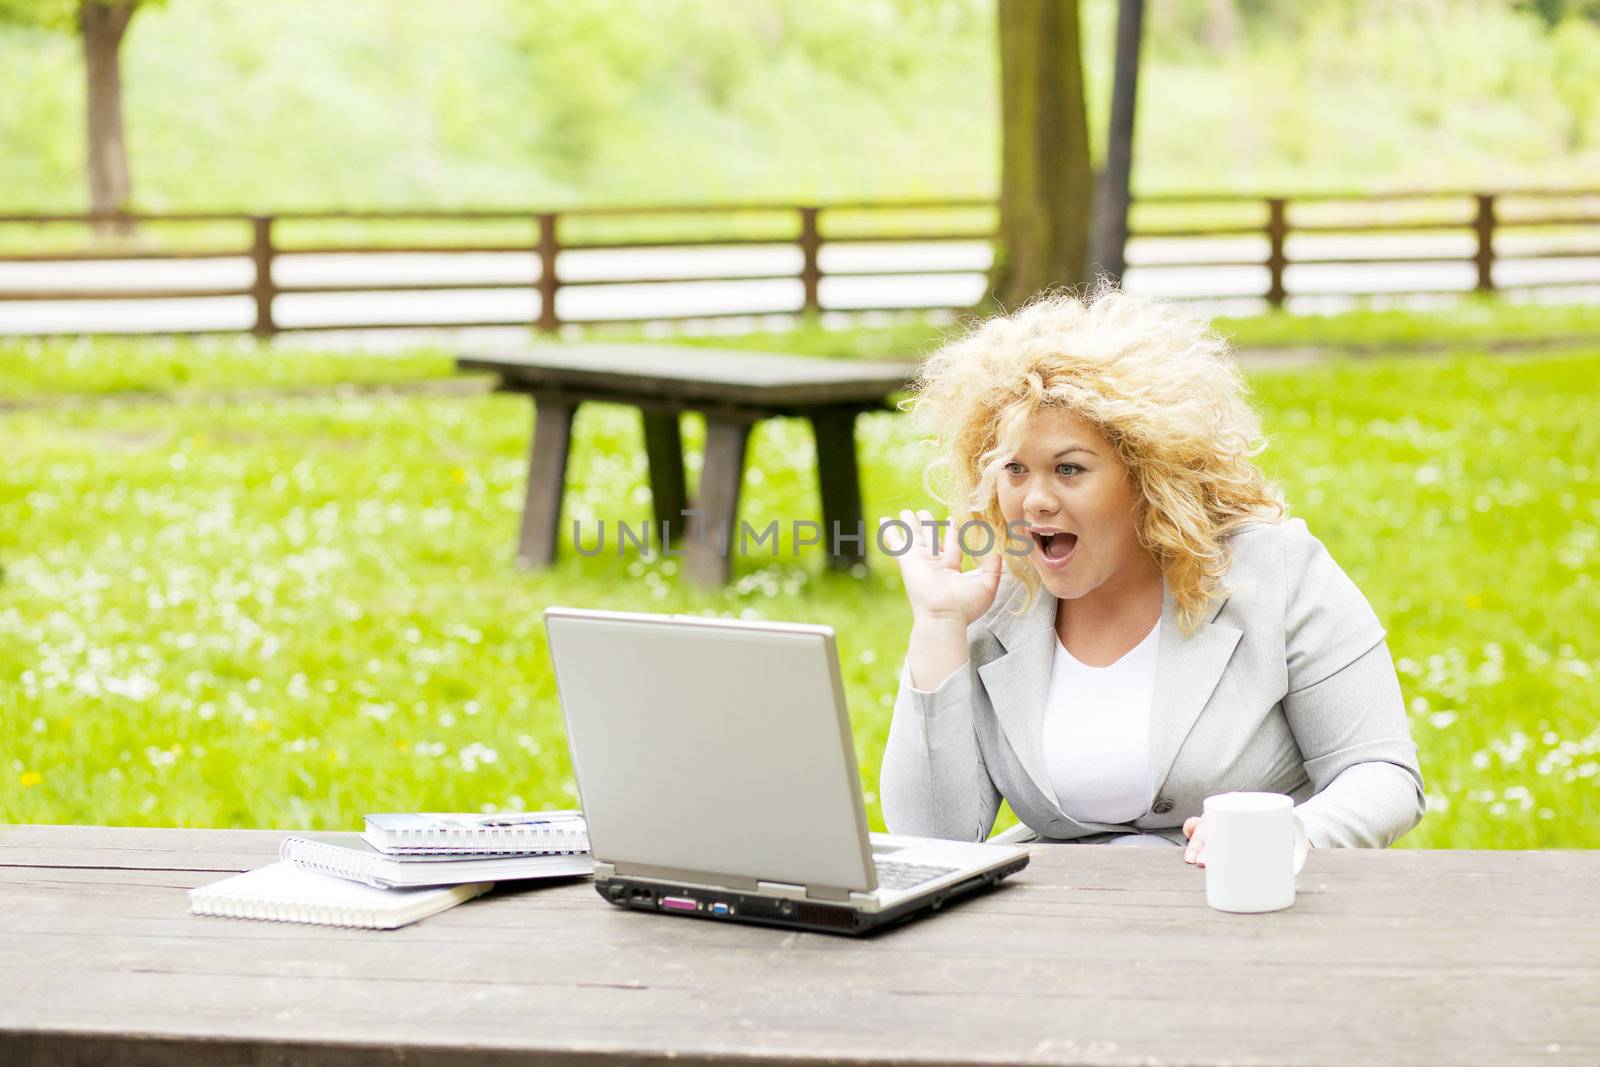 Excite Young woman using laptop in park